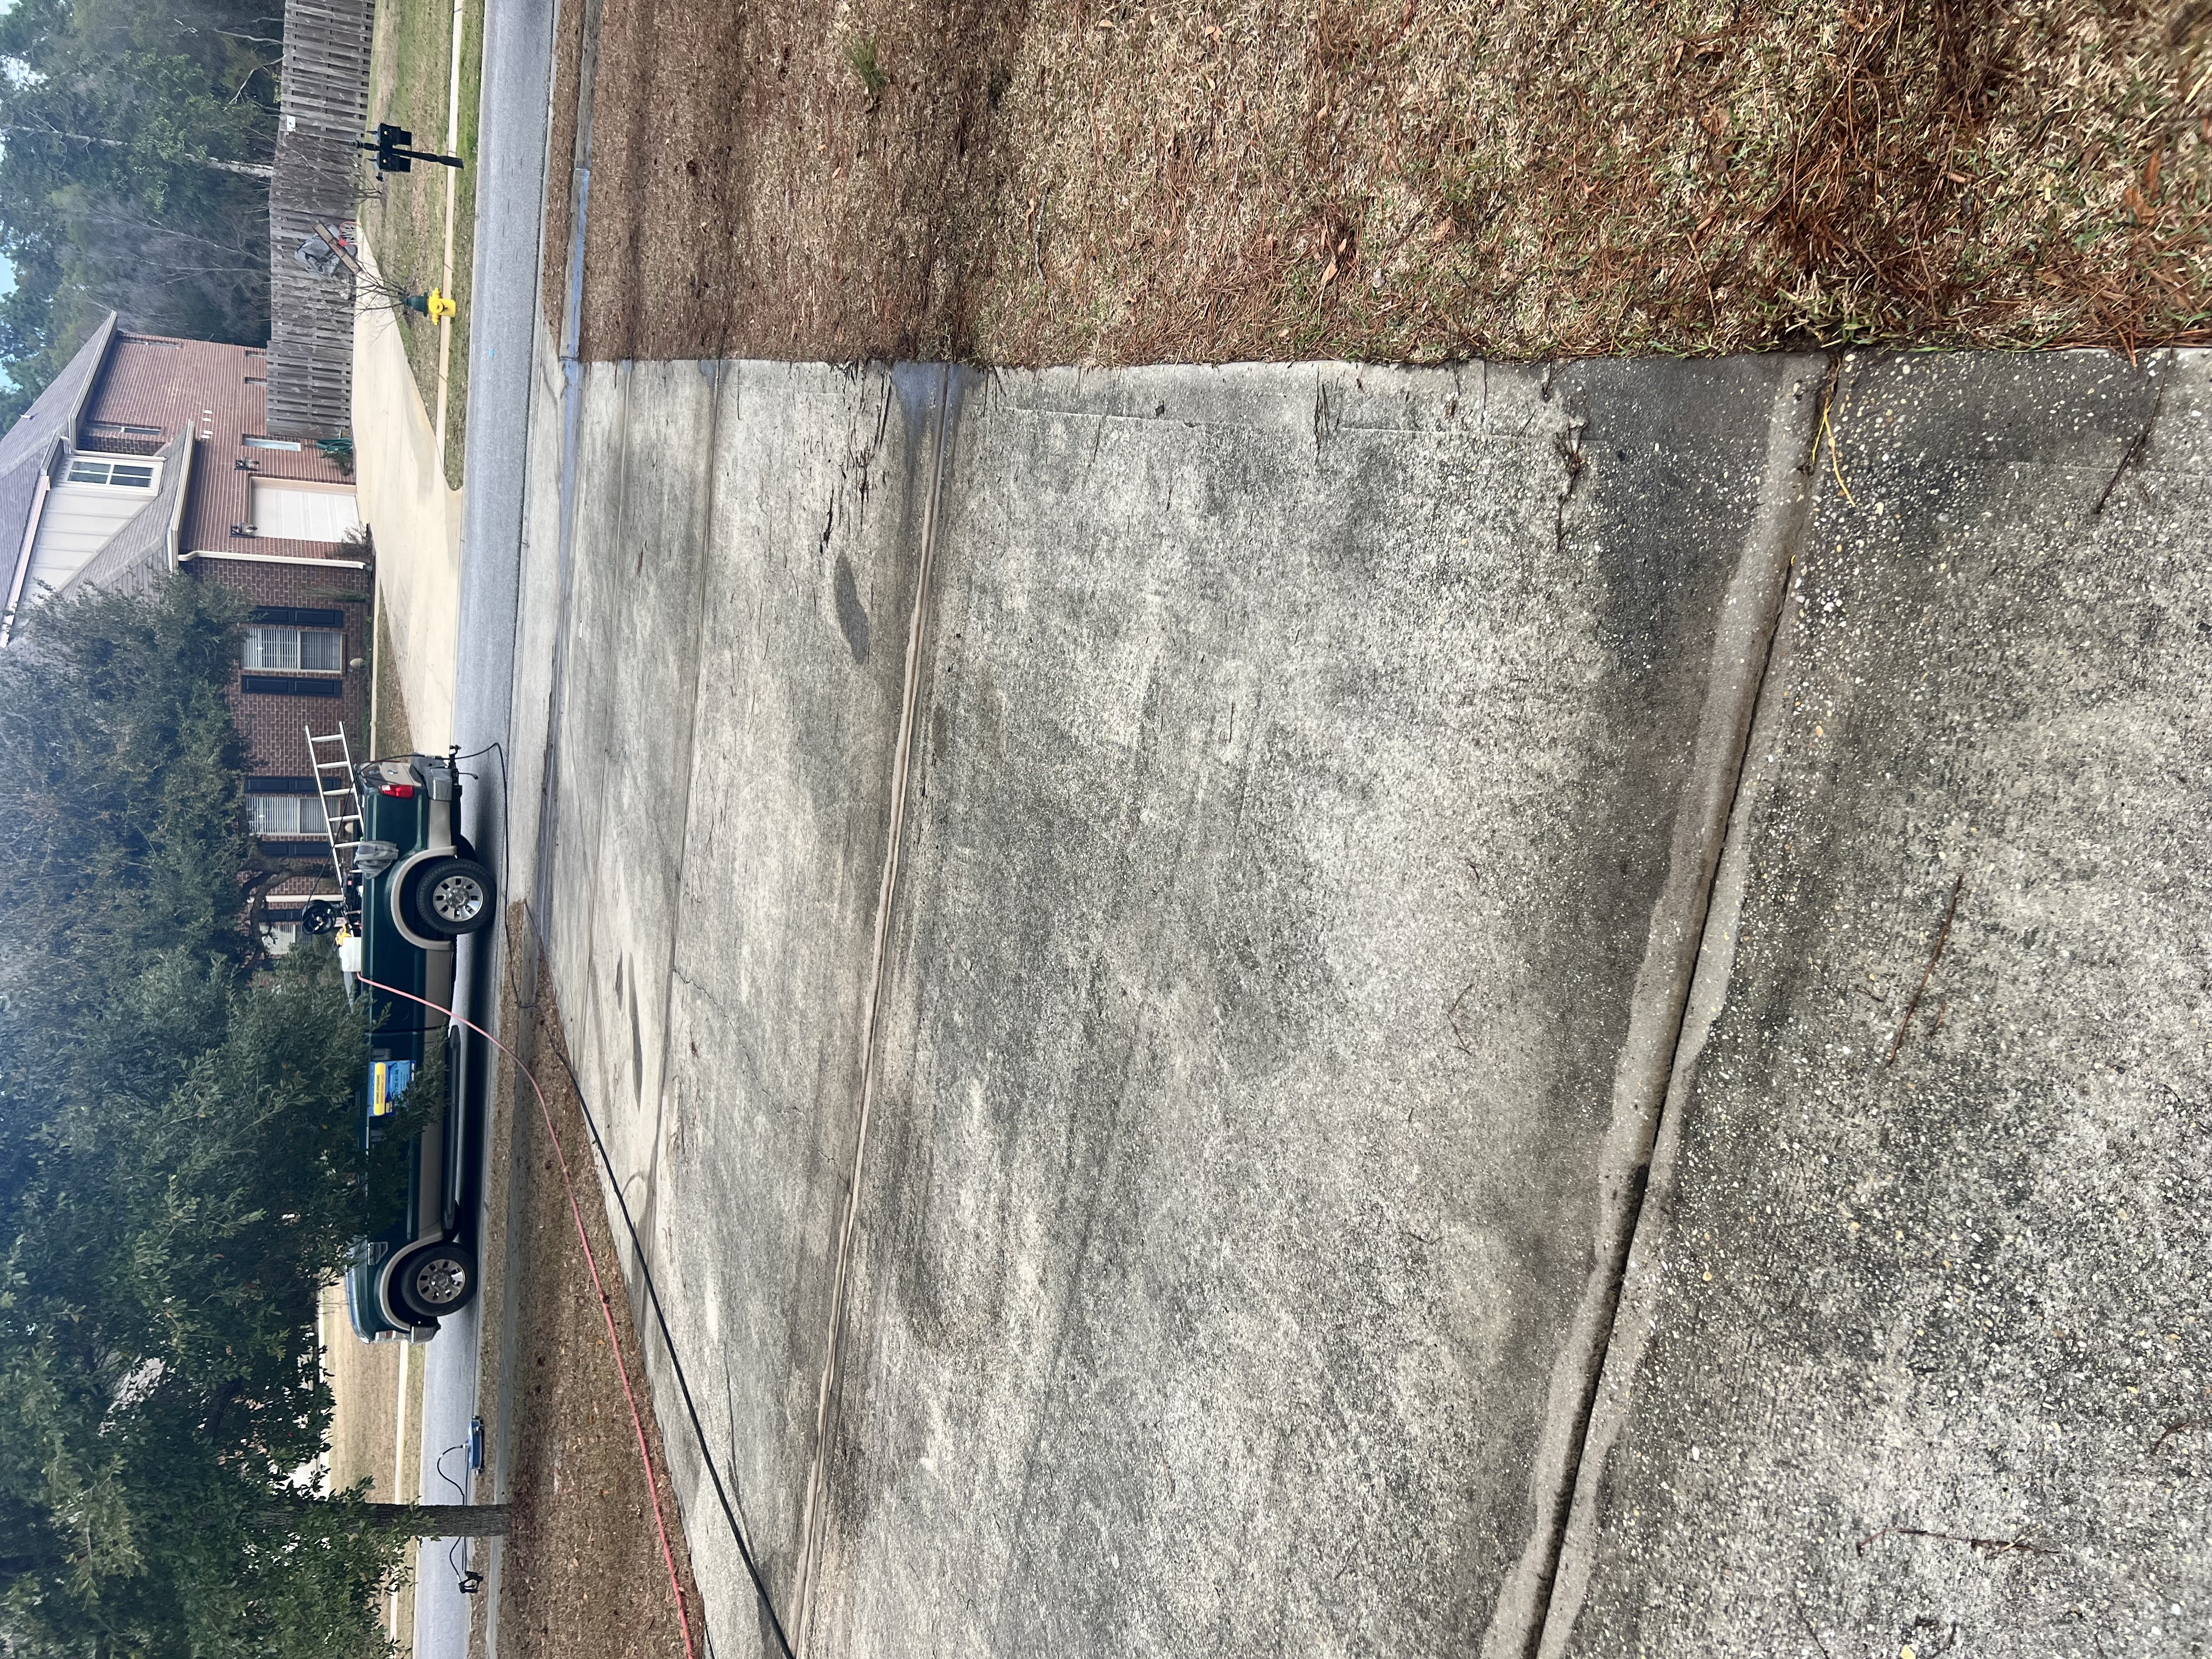 Efficient Hydro Dynamic Power Wash, LLC. took the challenge in Hammock Bay in the city of Freeport